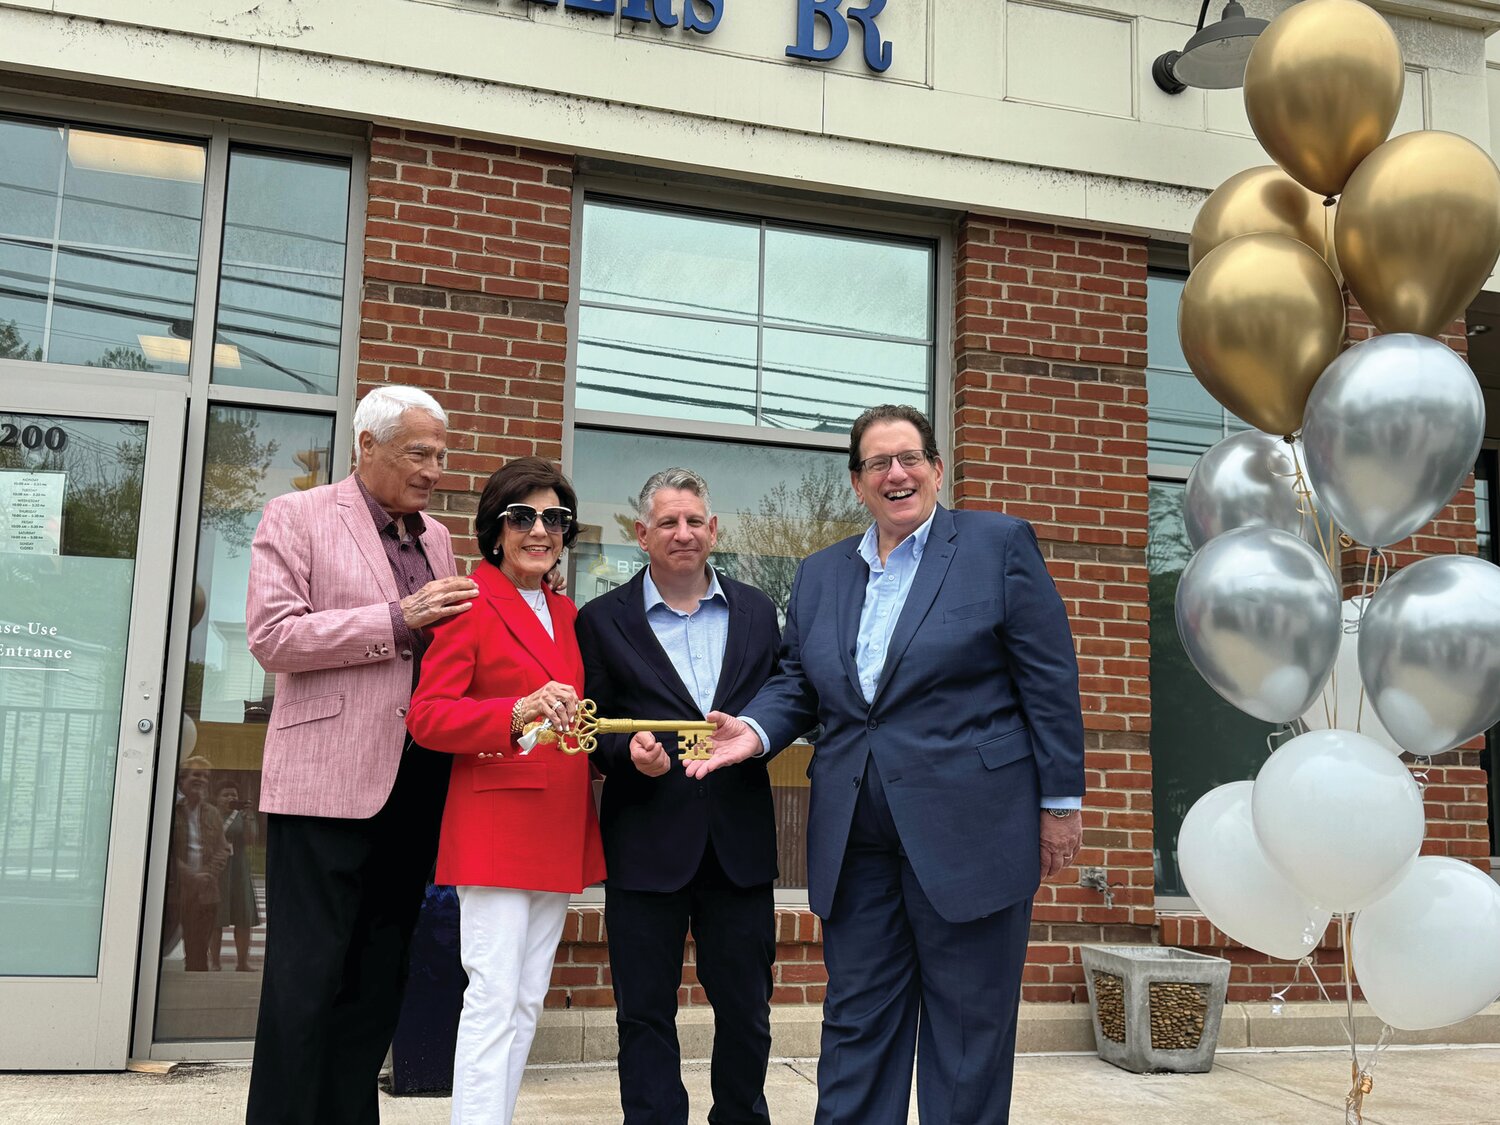 From left are Harvey and Madalyn Rovinsky, turning over the ceremonial key to new Bernie Robbins Jewelers owners Stephen Berman, based in the Newtown store, and Steve Jaffe, based in the Somers Point, N.J., store.